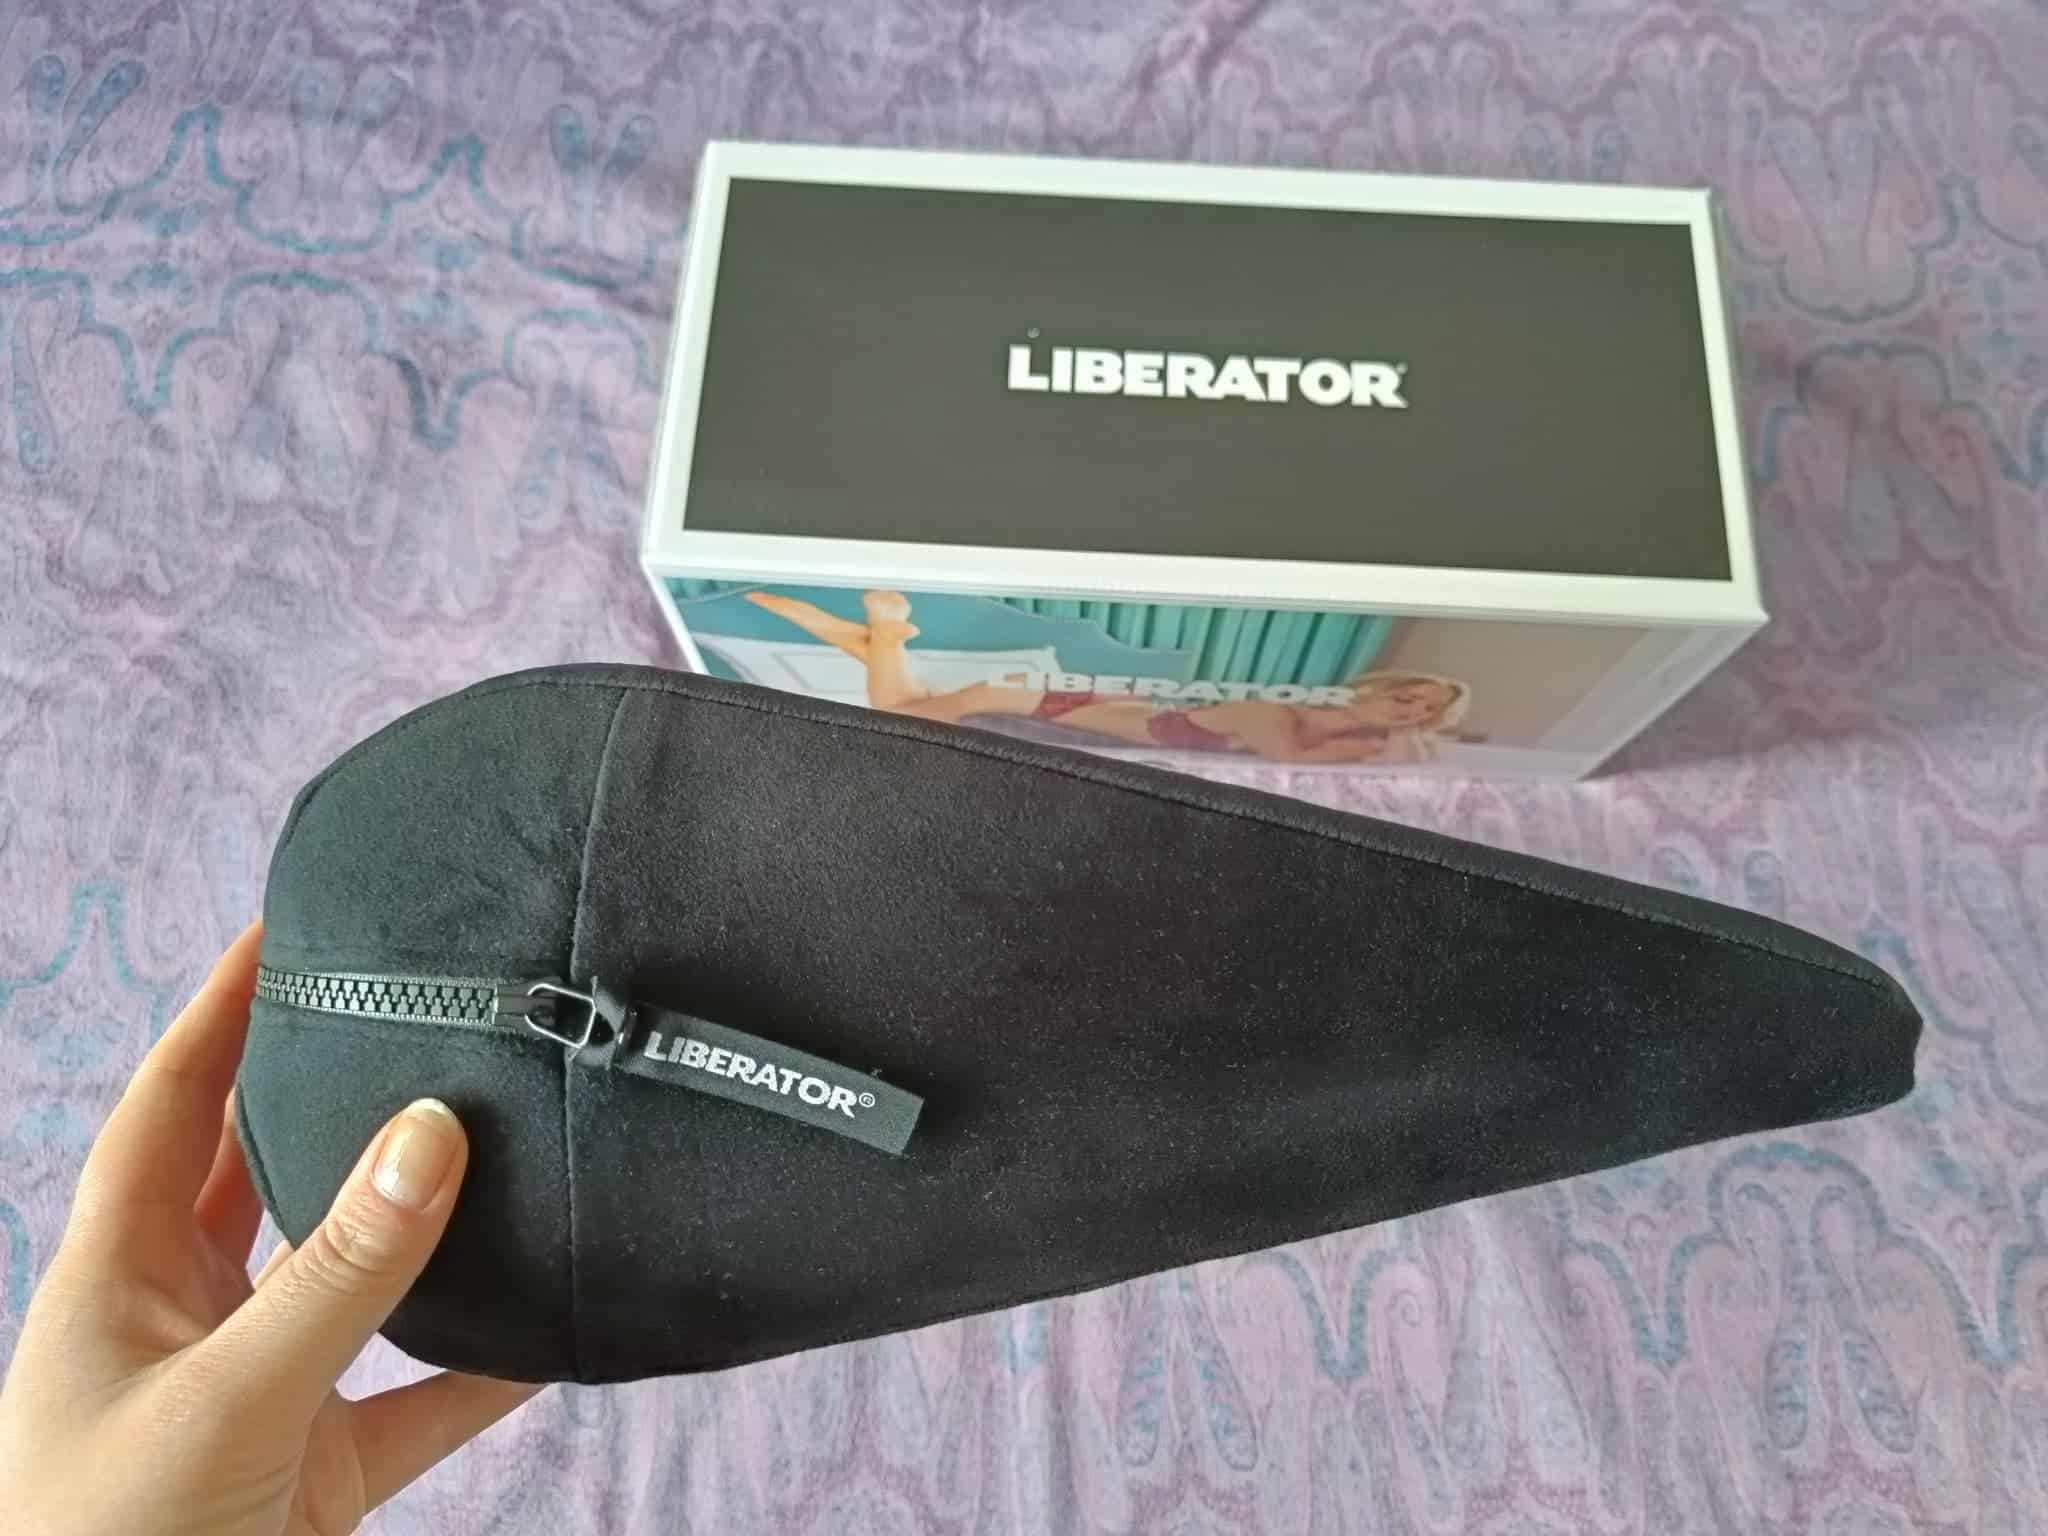 Liberator Jaz Does the Liberator Jaz deliver on quality?